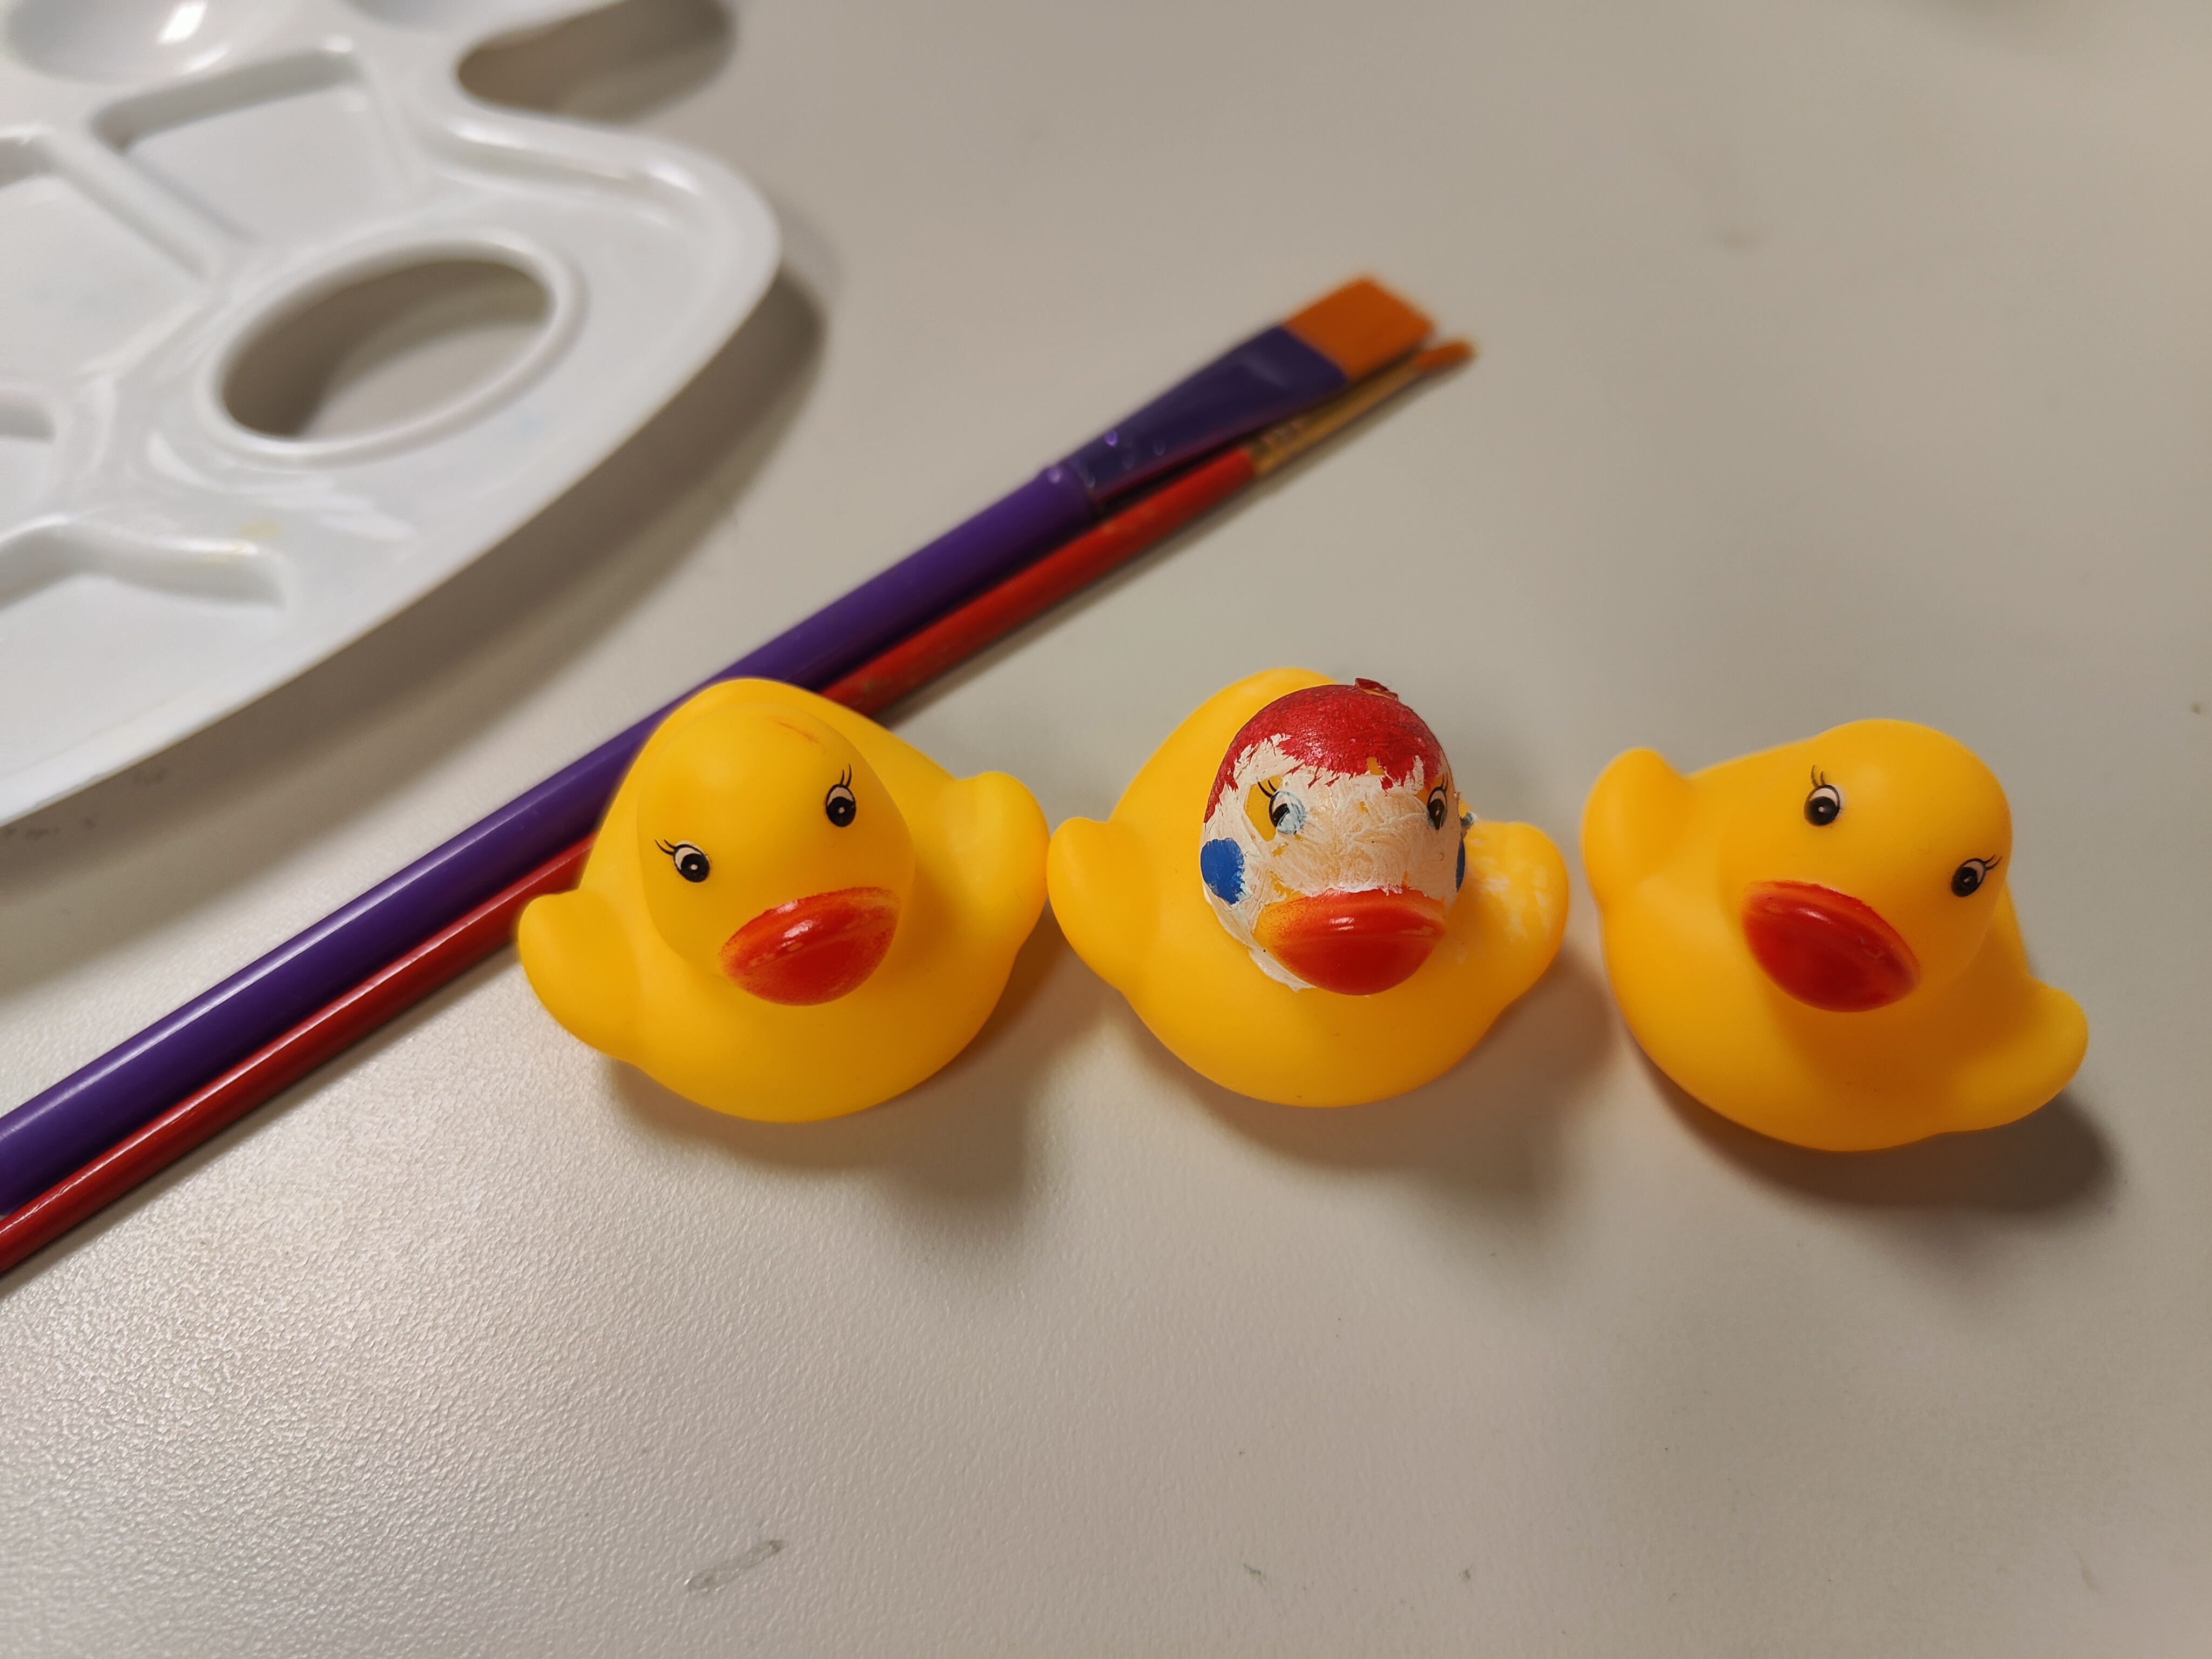 3 yellow rubber ducks with middle duck with clown paint with 2 paintbrushes and paint palette